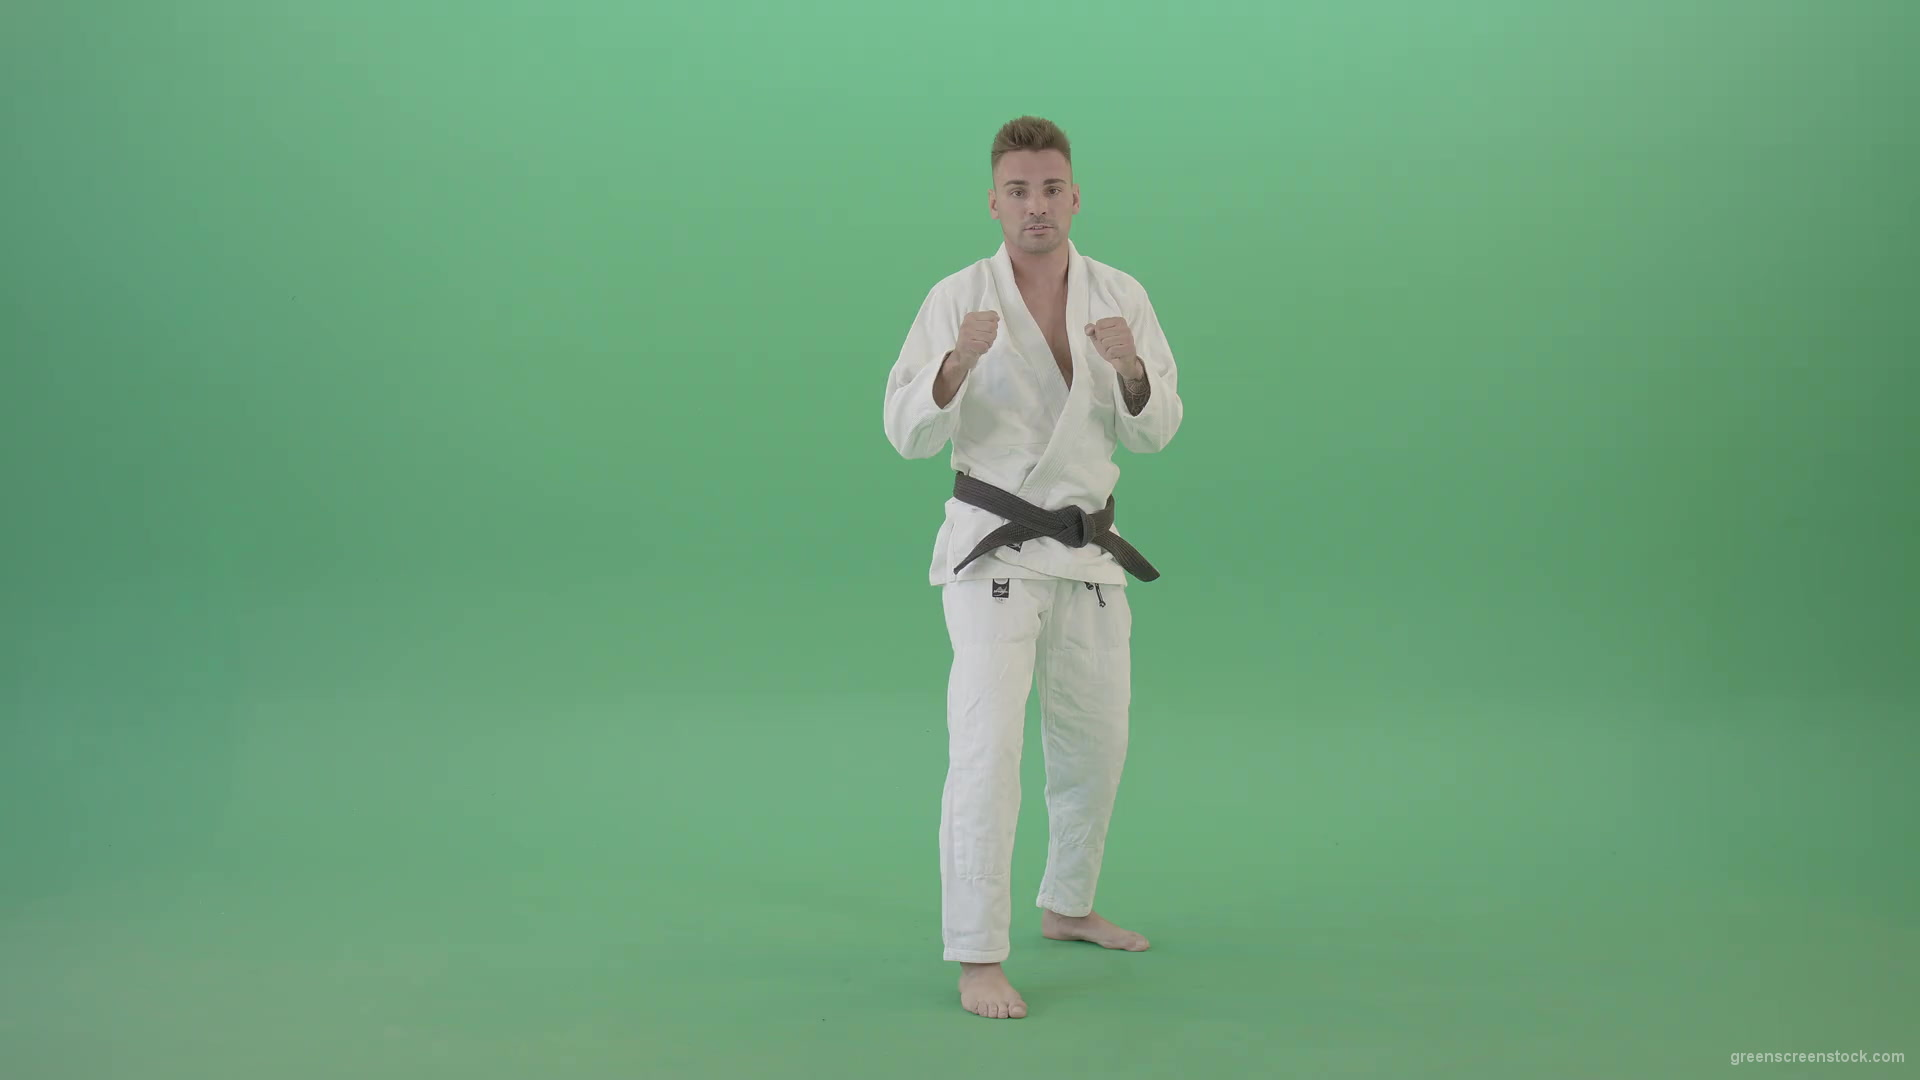 Karate-Man-boxing-making-punch-front-view-isolated-on-green-screen-1920_001 Green Screen Stock